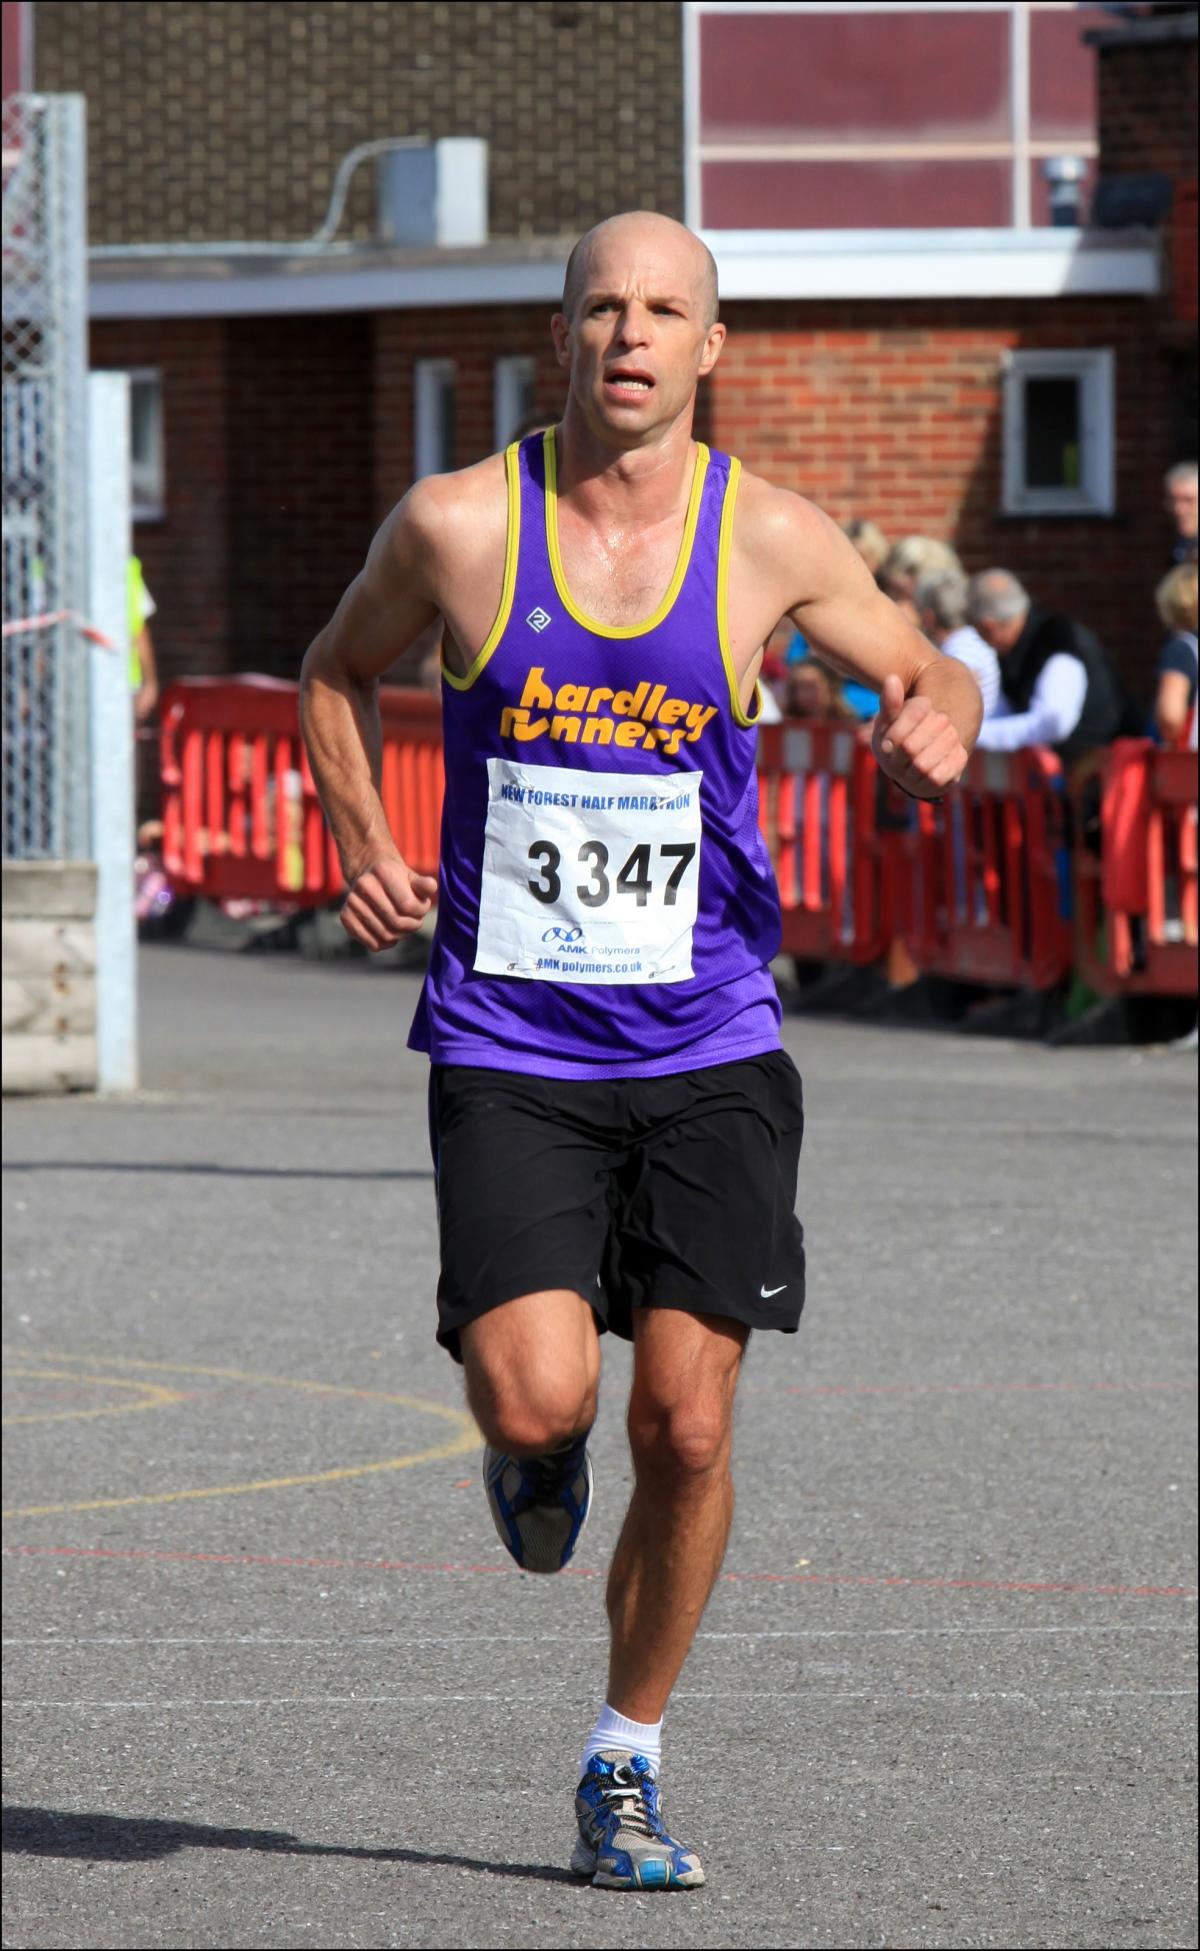 Pictures from this years New Forest Half Marathon 2013.